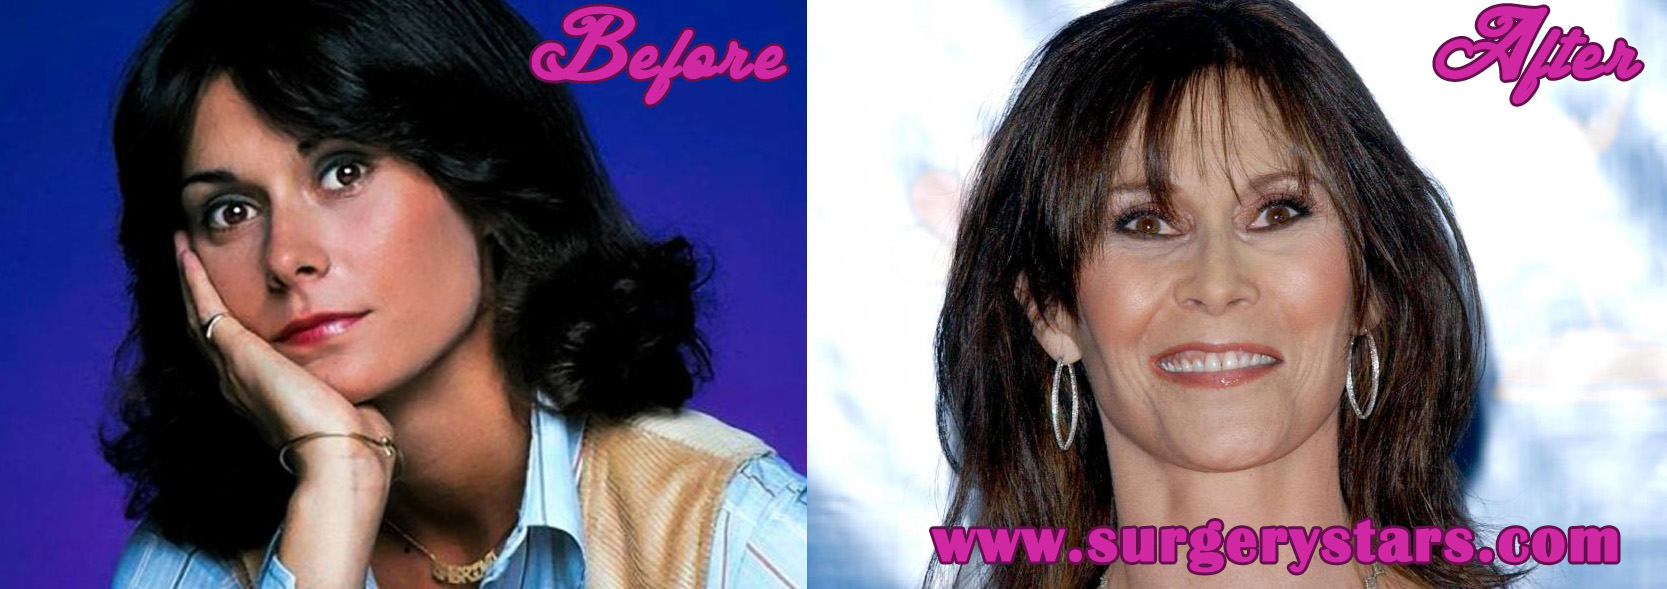 kate jackson plastic surgery before and after